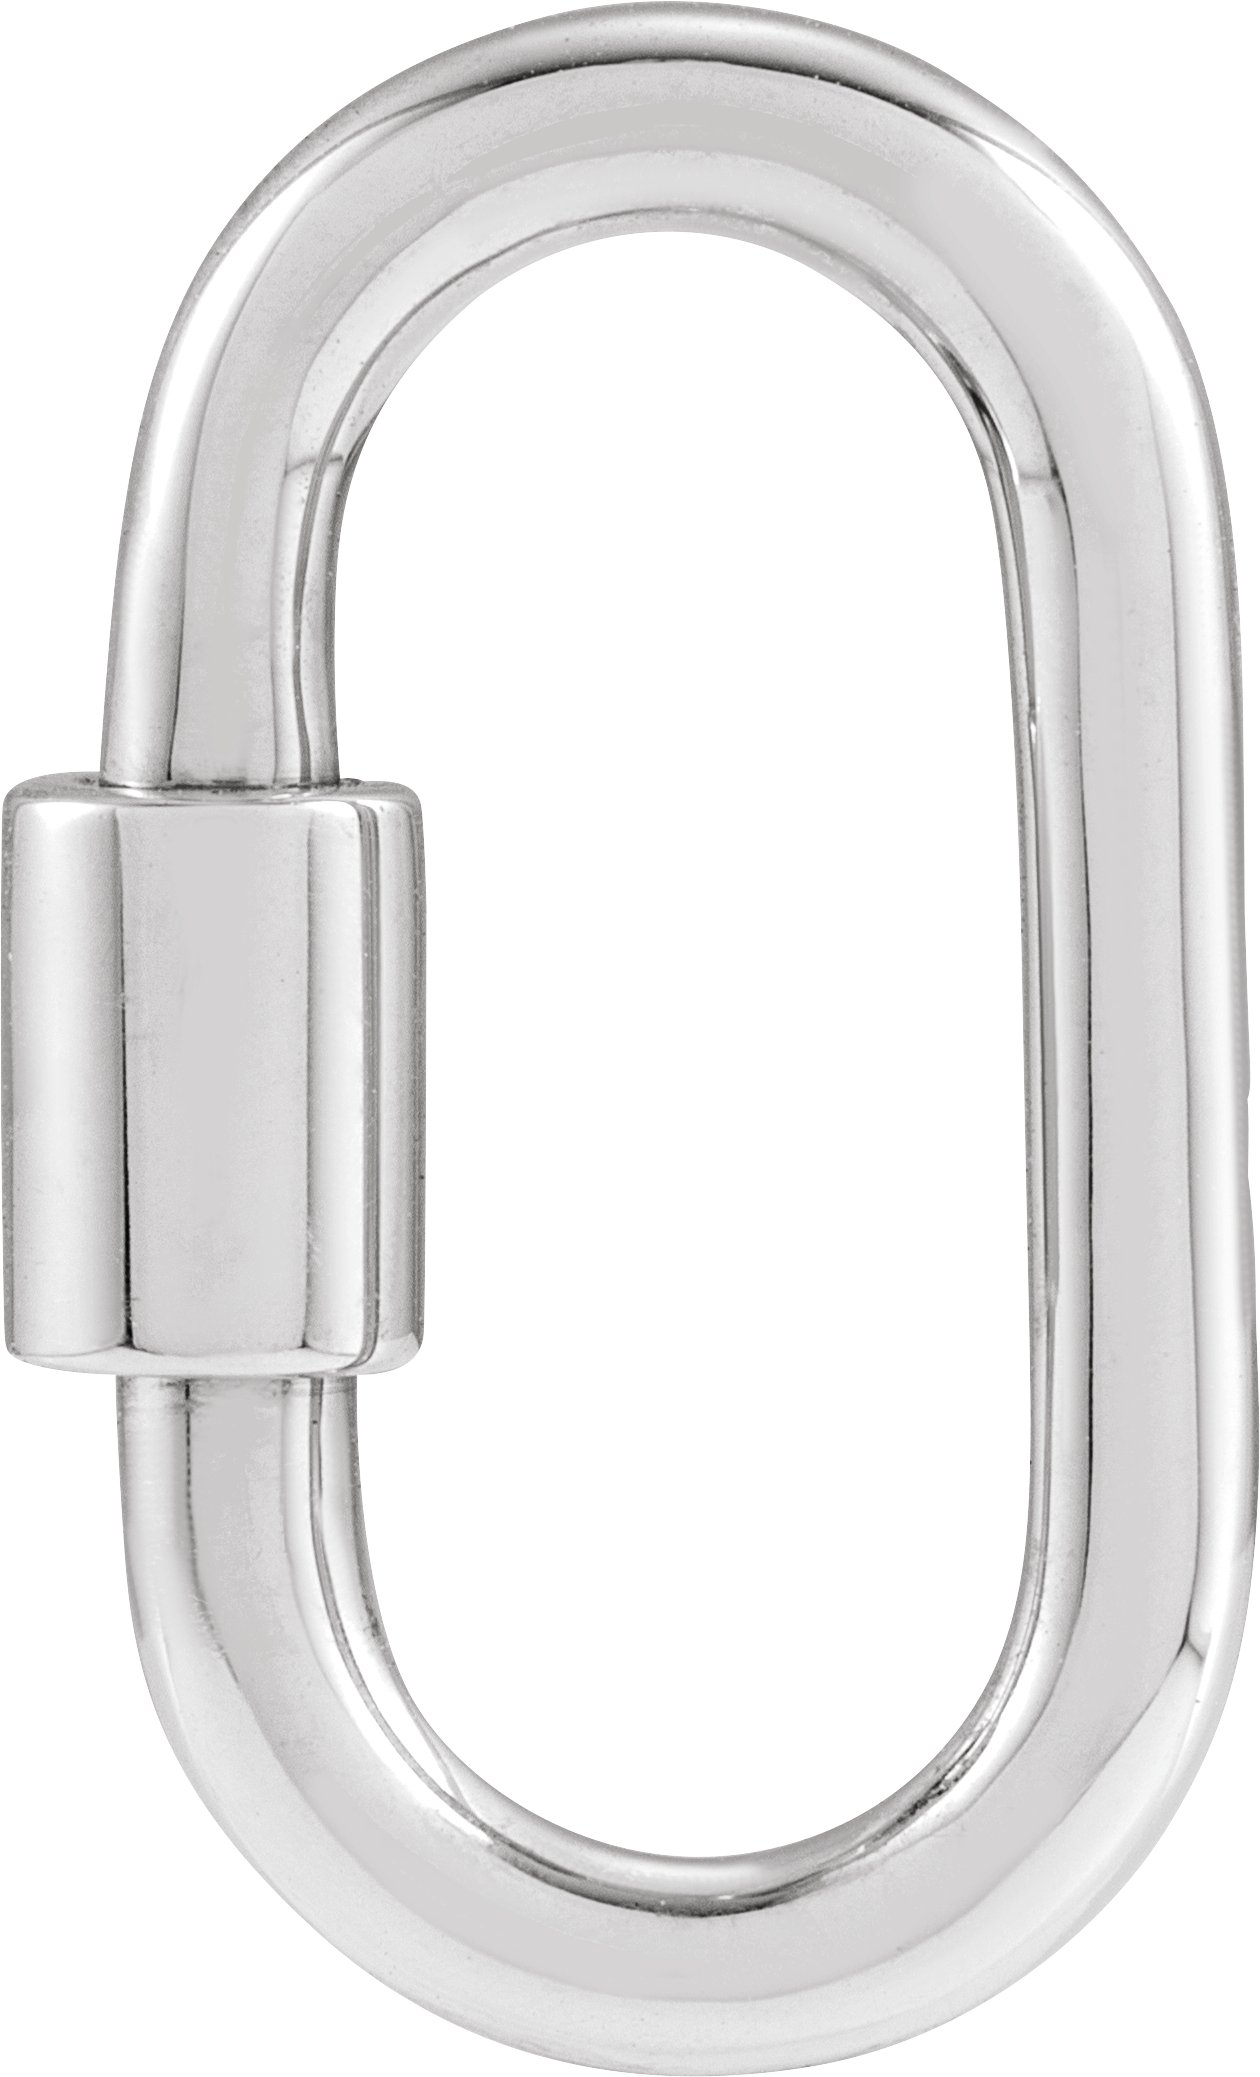 Sterling Silver 22x12 mm Carabiner Locking Clasp | Stuller